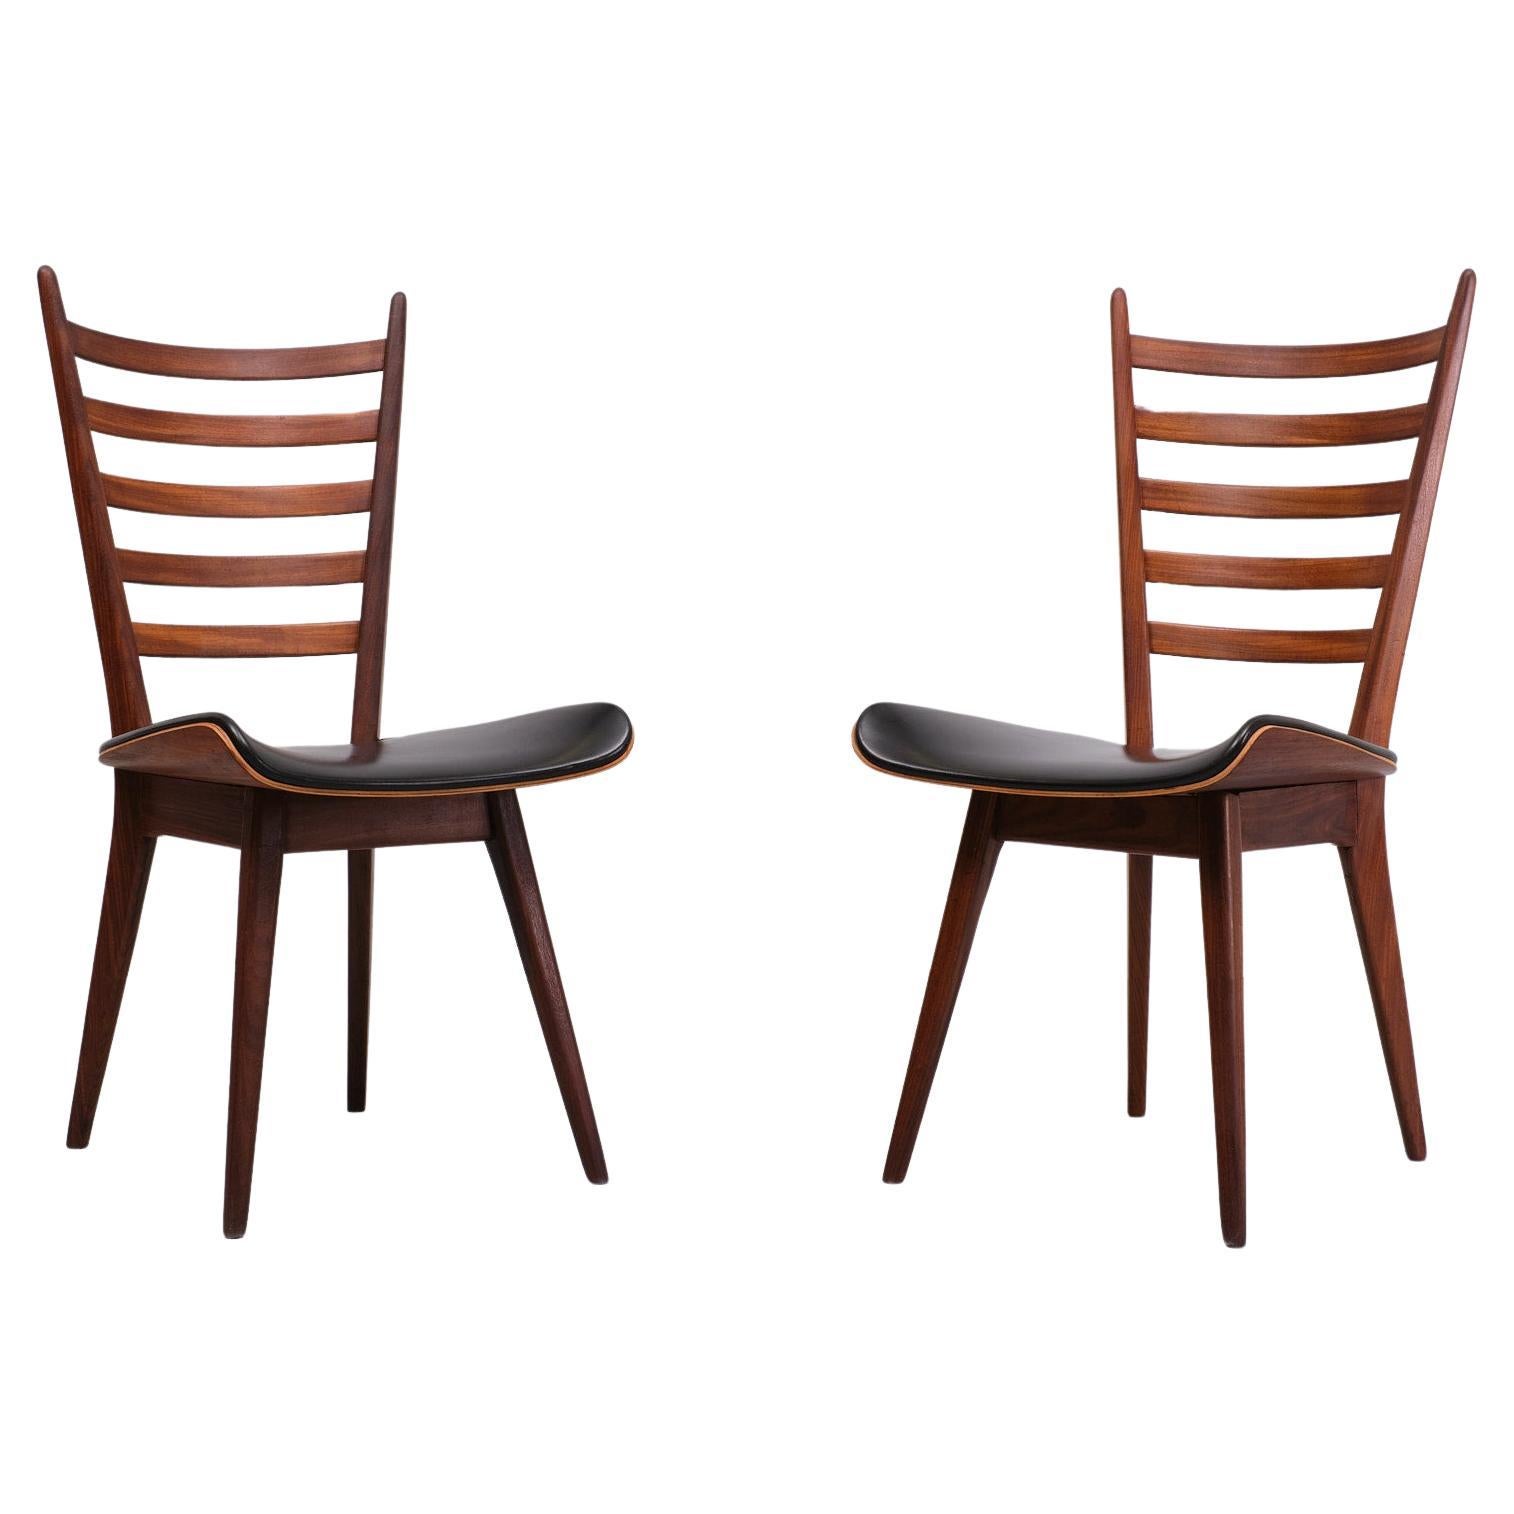 Cees Braakman  curved ladder chairs 1950s  Holland  For Sale